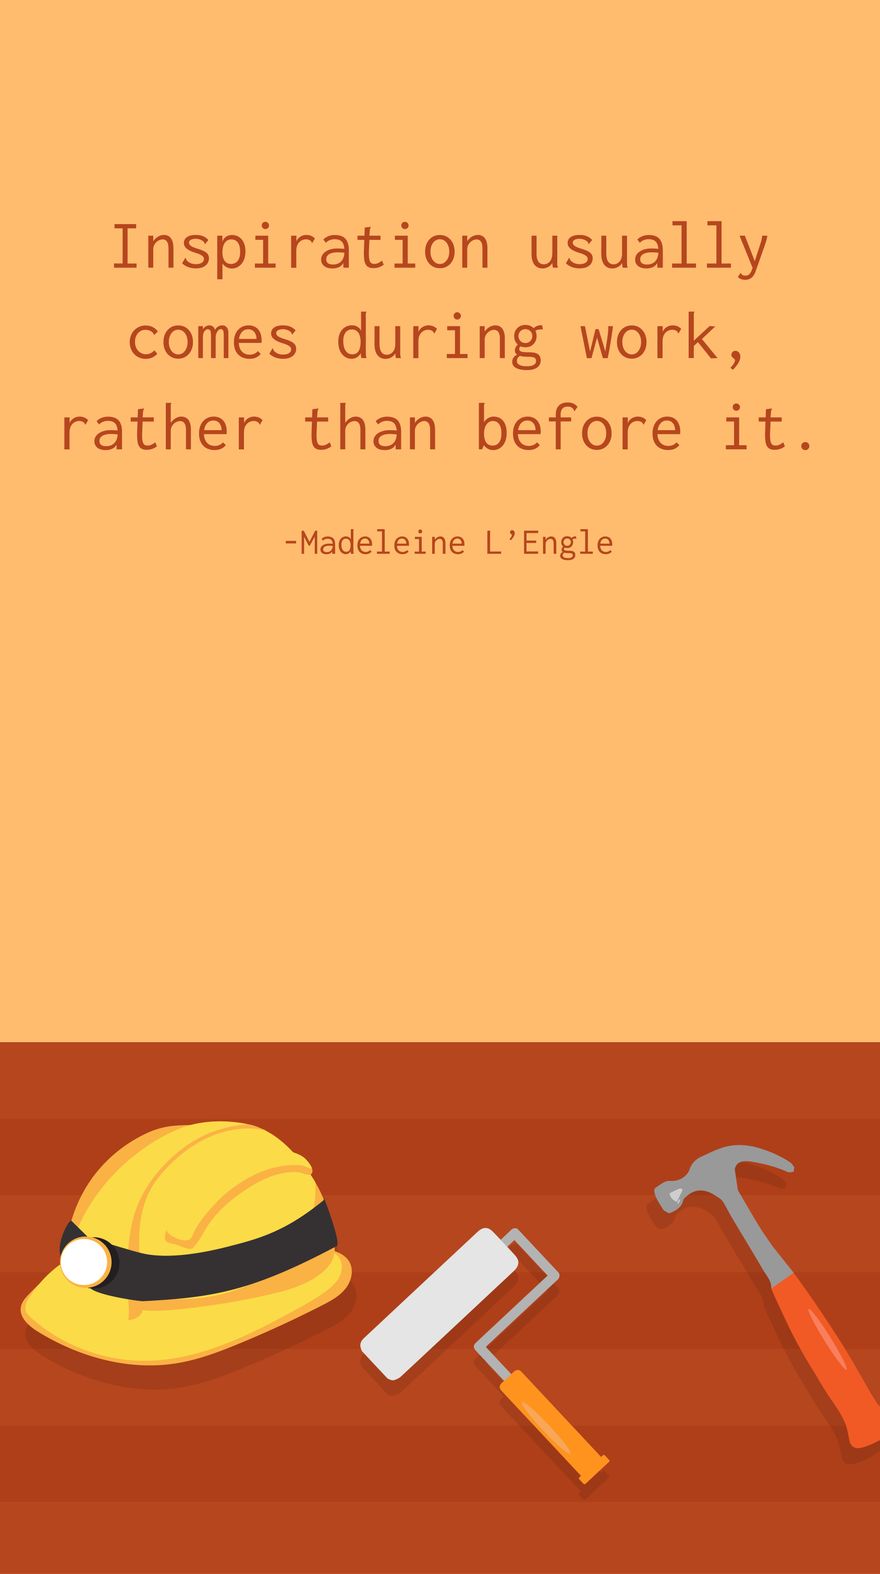 Free Madeleine L’Engle - Inspiration usually comes during work, rather than before it.